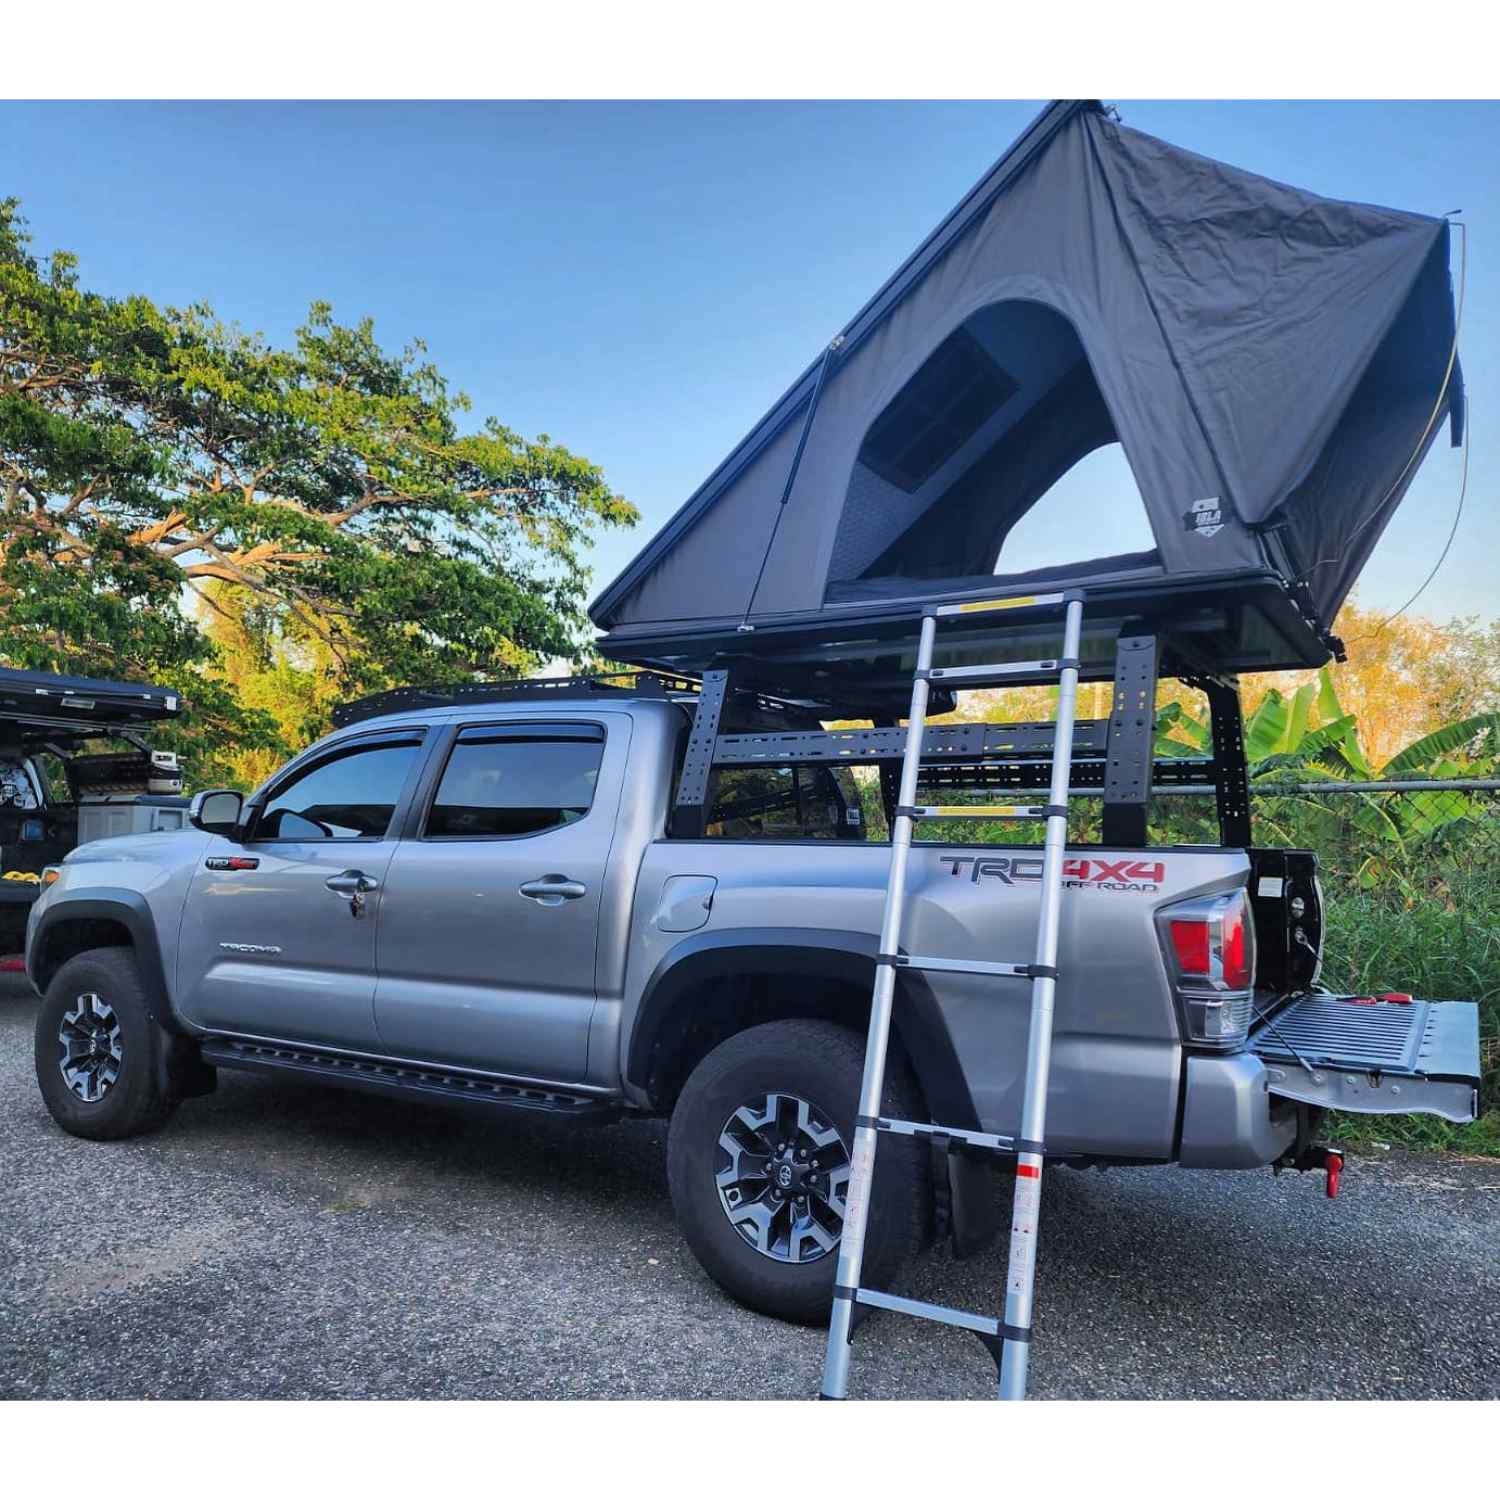 Tuwa Pro Mounted Shiprock on Tacoma with Roof Top Tent on Top